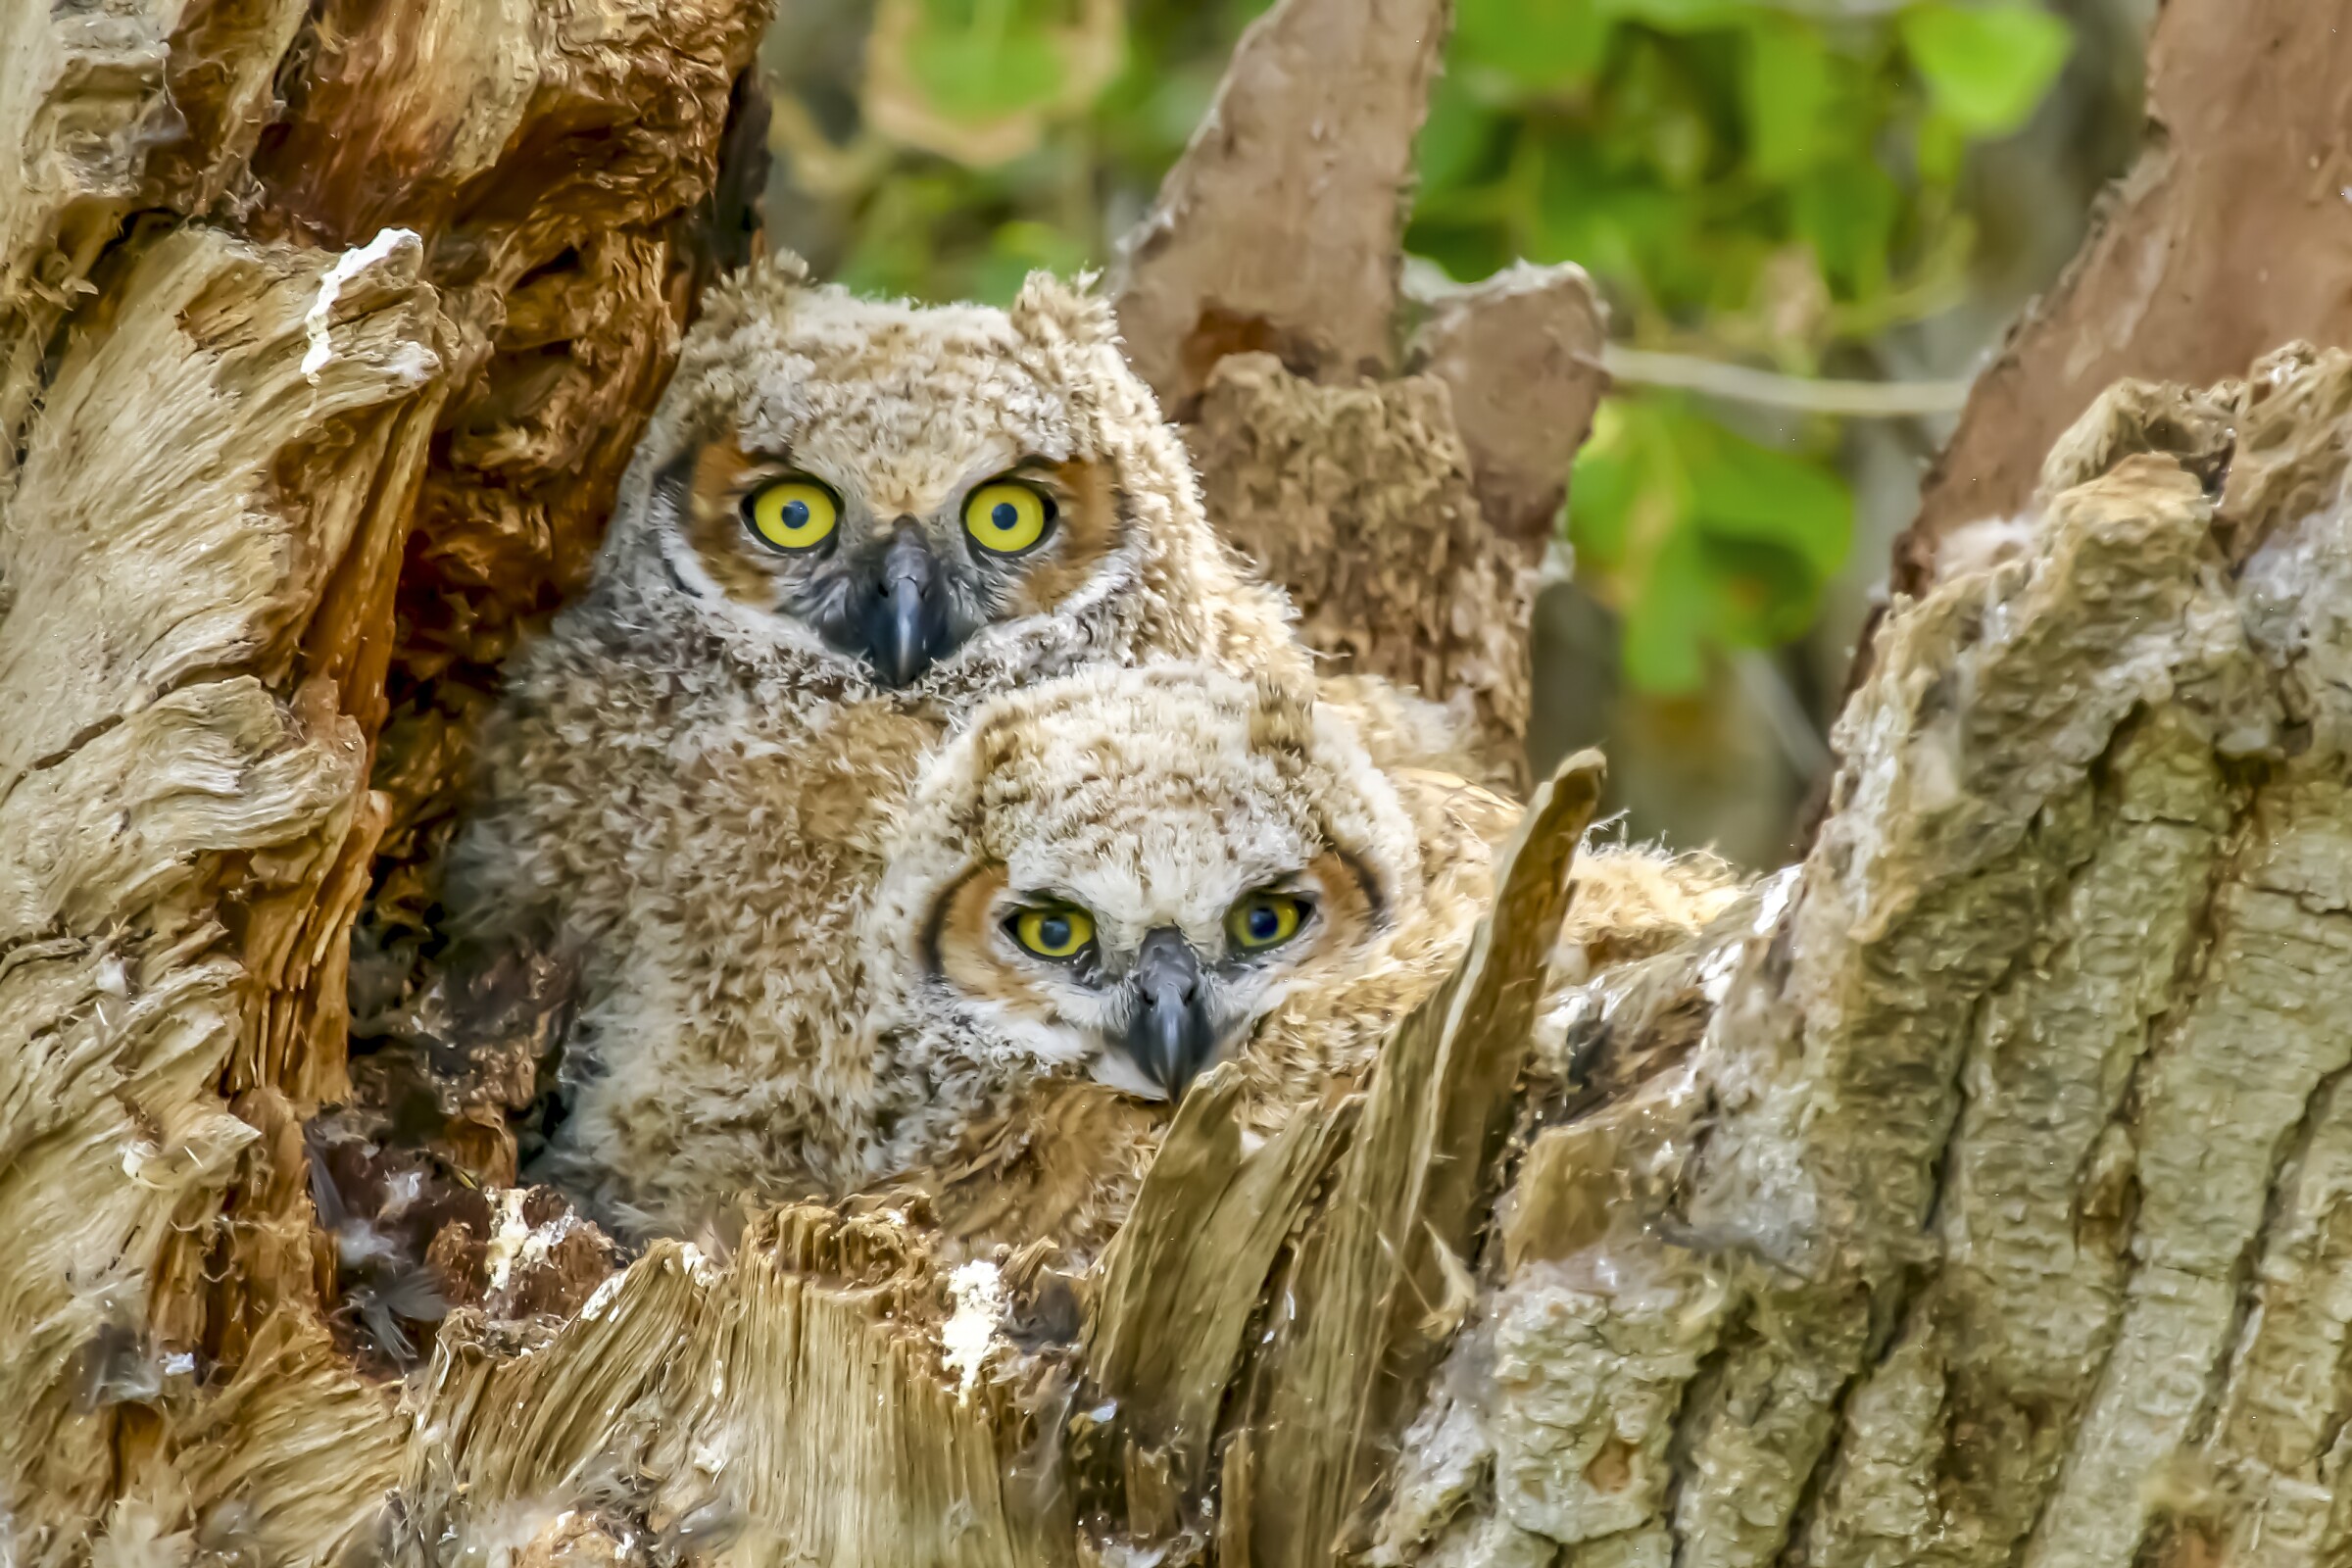 A pair of great horned owlets nestled in a tree cavity at the Sacramento National Wildlife Refuge patiently await their next meal.